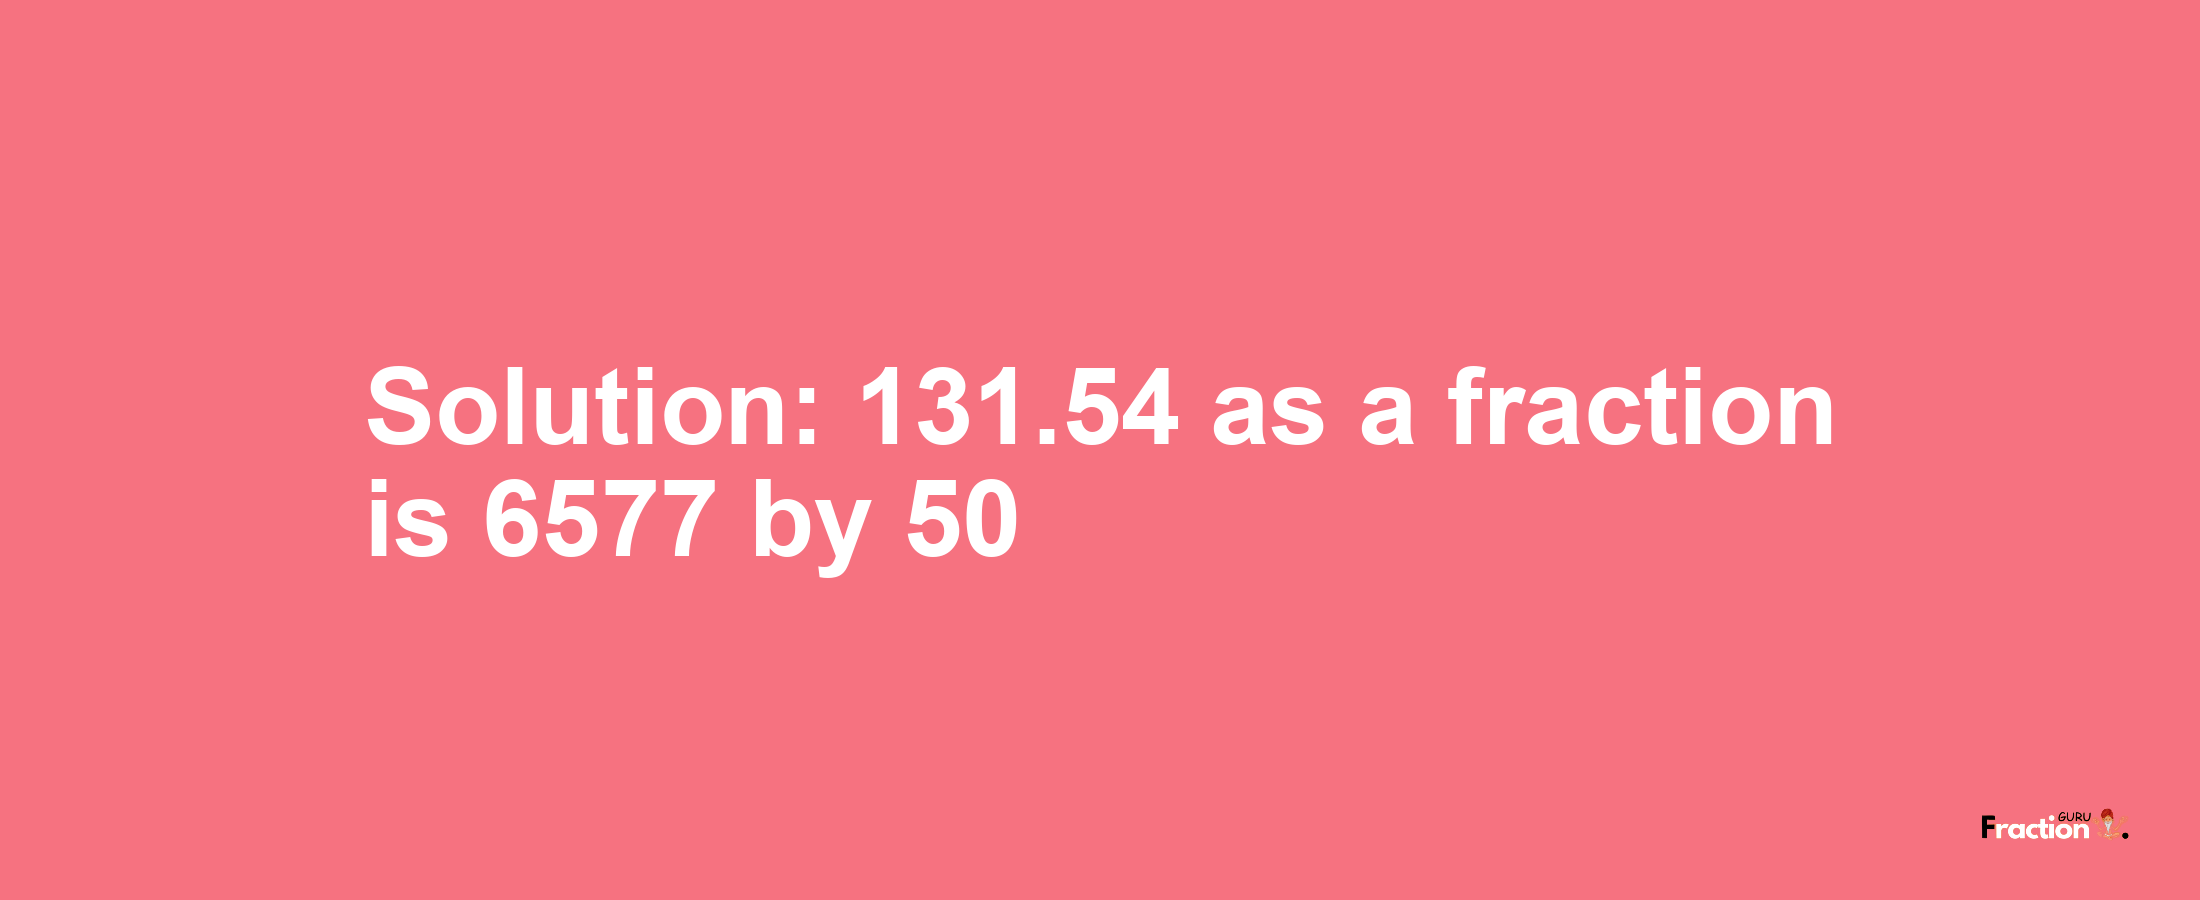 Solution:131.54 as a fraction is 6577/50